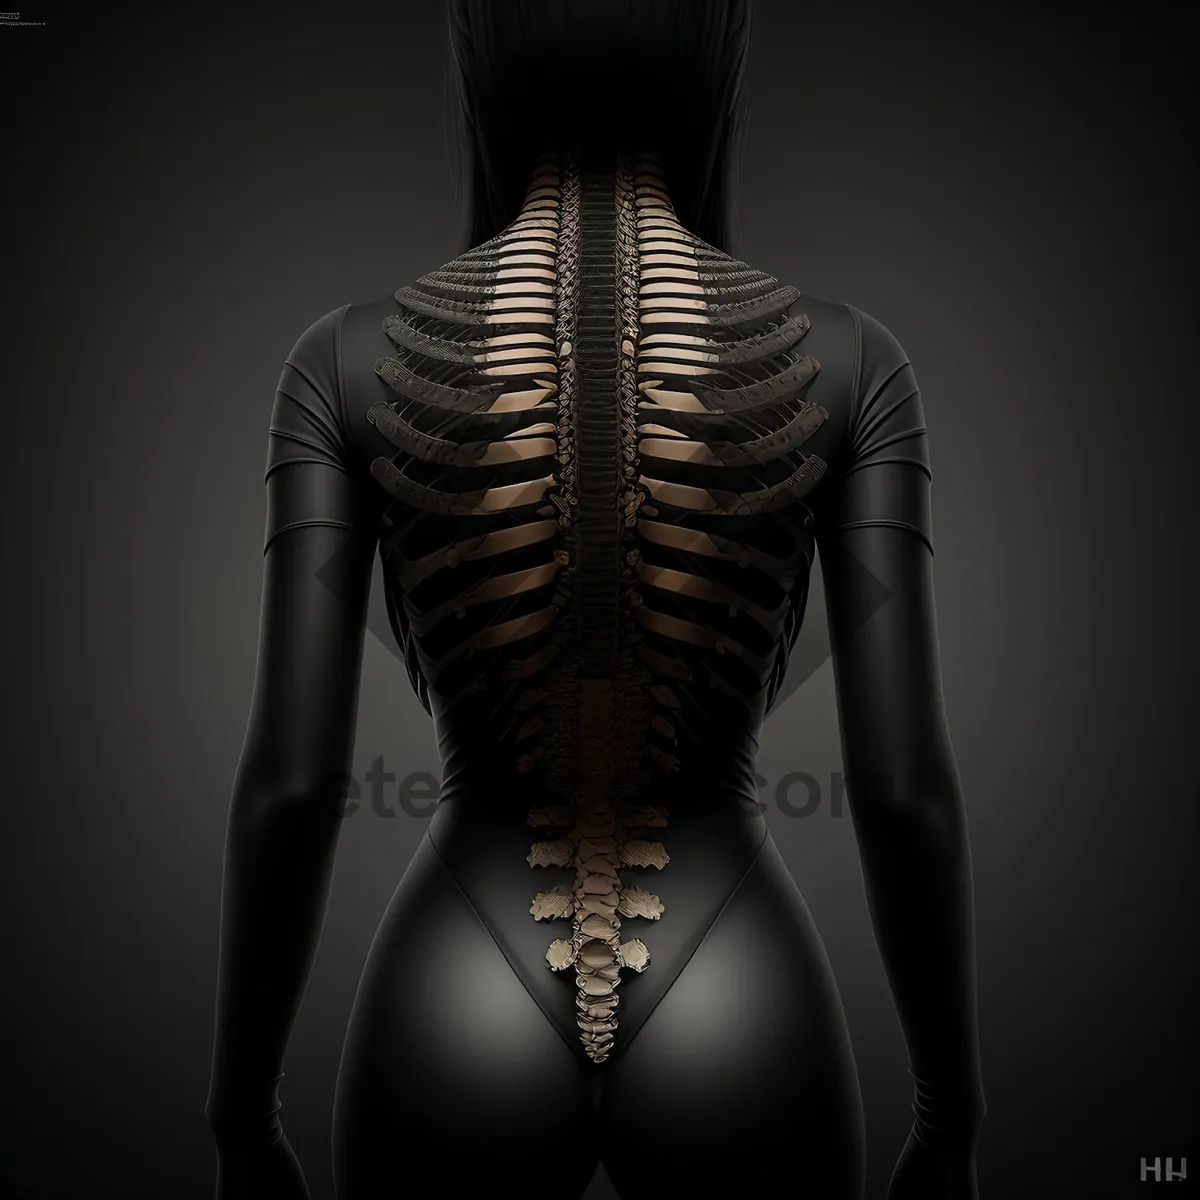 Picture of Anatomical skeletal structure with transparent 3D spine.